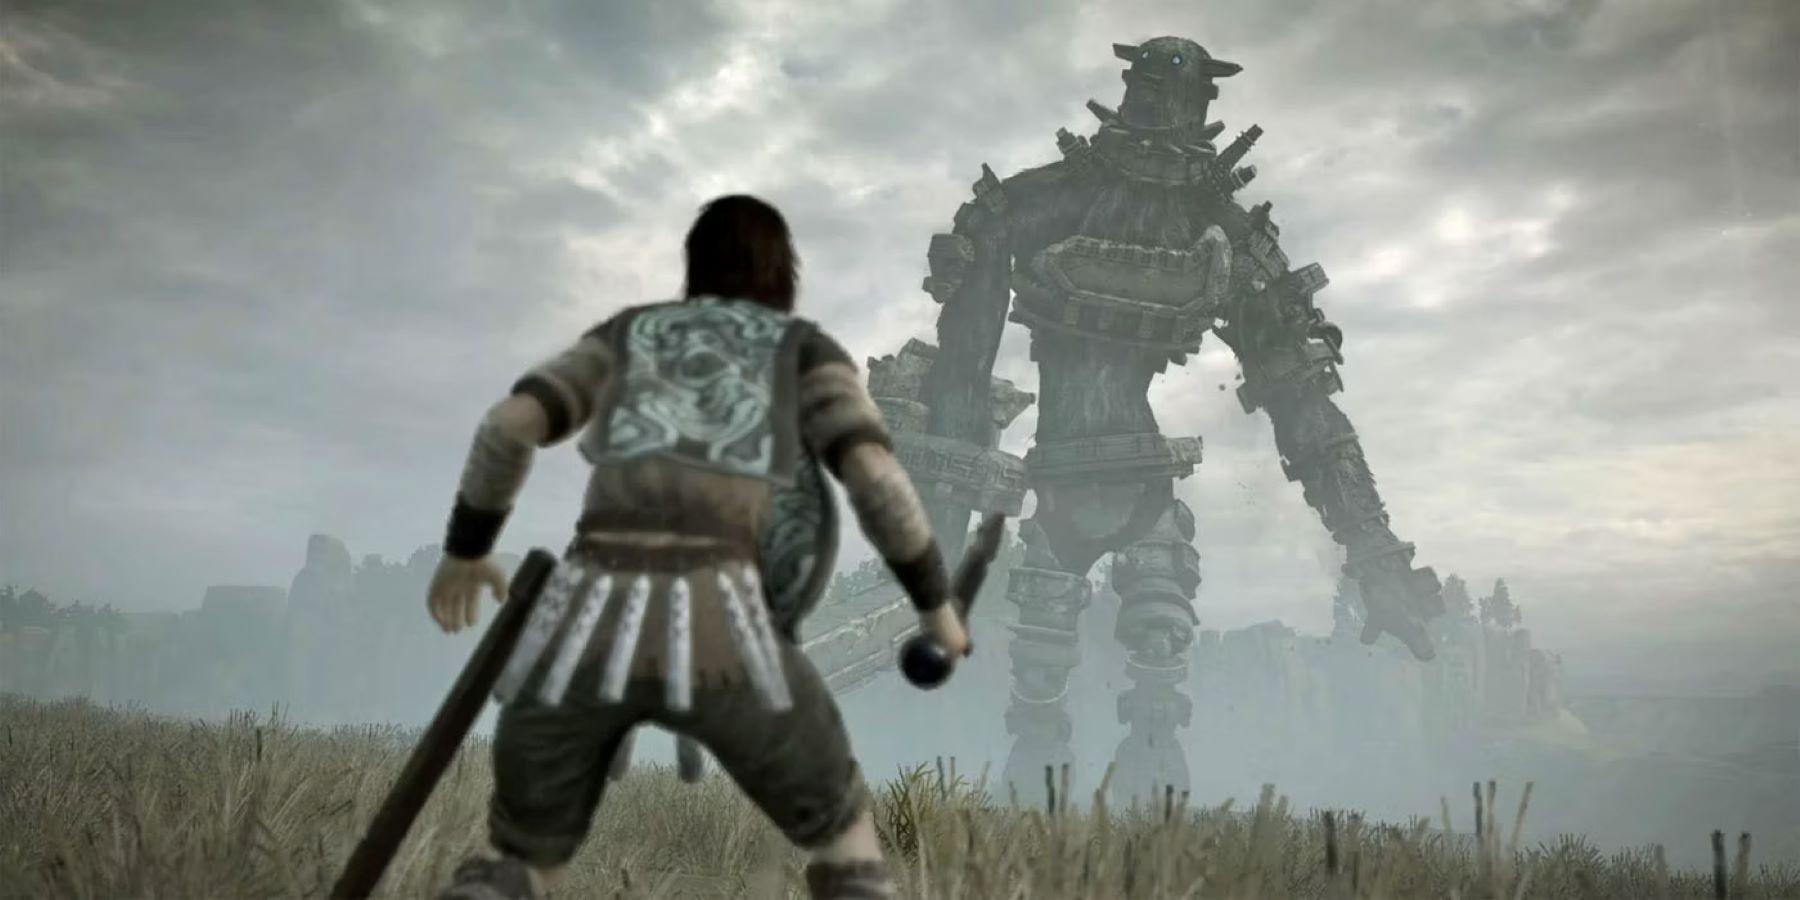 Wander confronting one of the colossi in Shadow of the Colossus